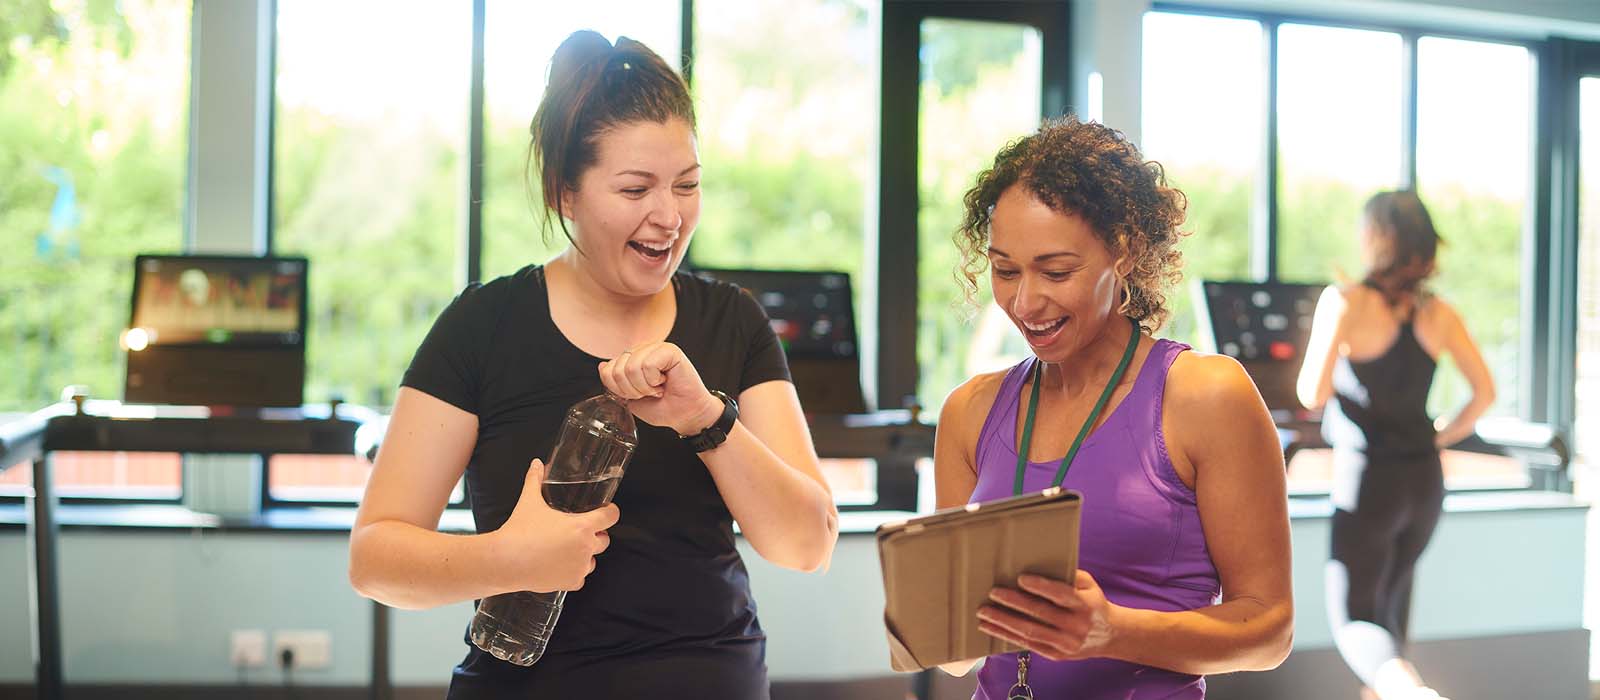 personal-fitness-trainer-certificate-carroll-community-college